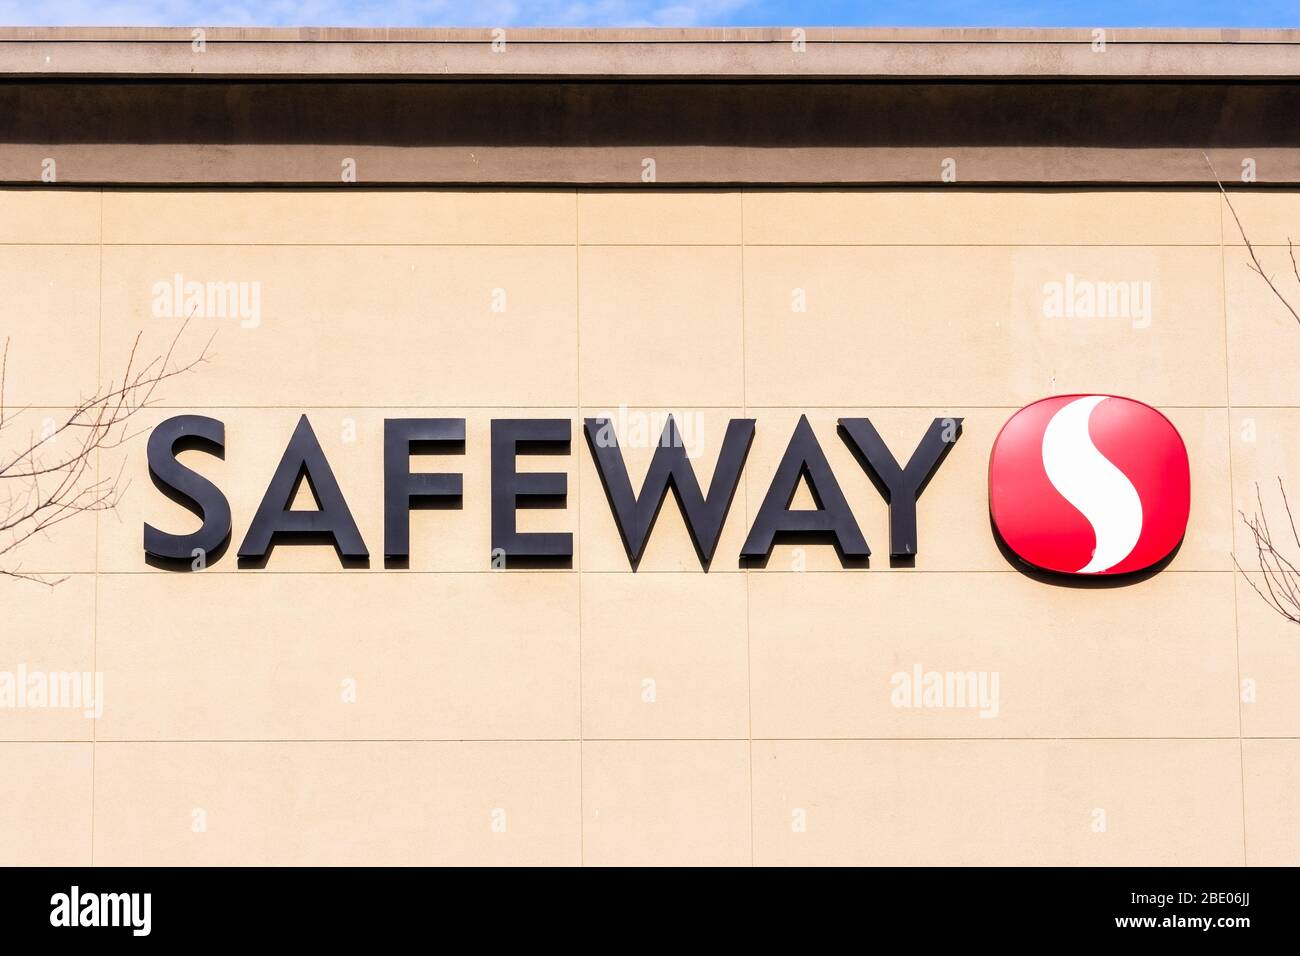 Jan 24, 2020 Mountain View / CA / USA - Close up of Safeway sign on the facade of a local store; Safeway is an American supermarket chain Stock Photo